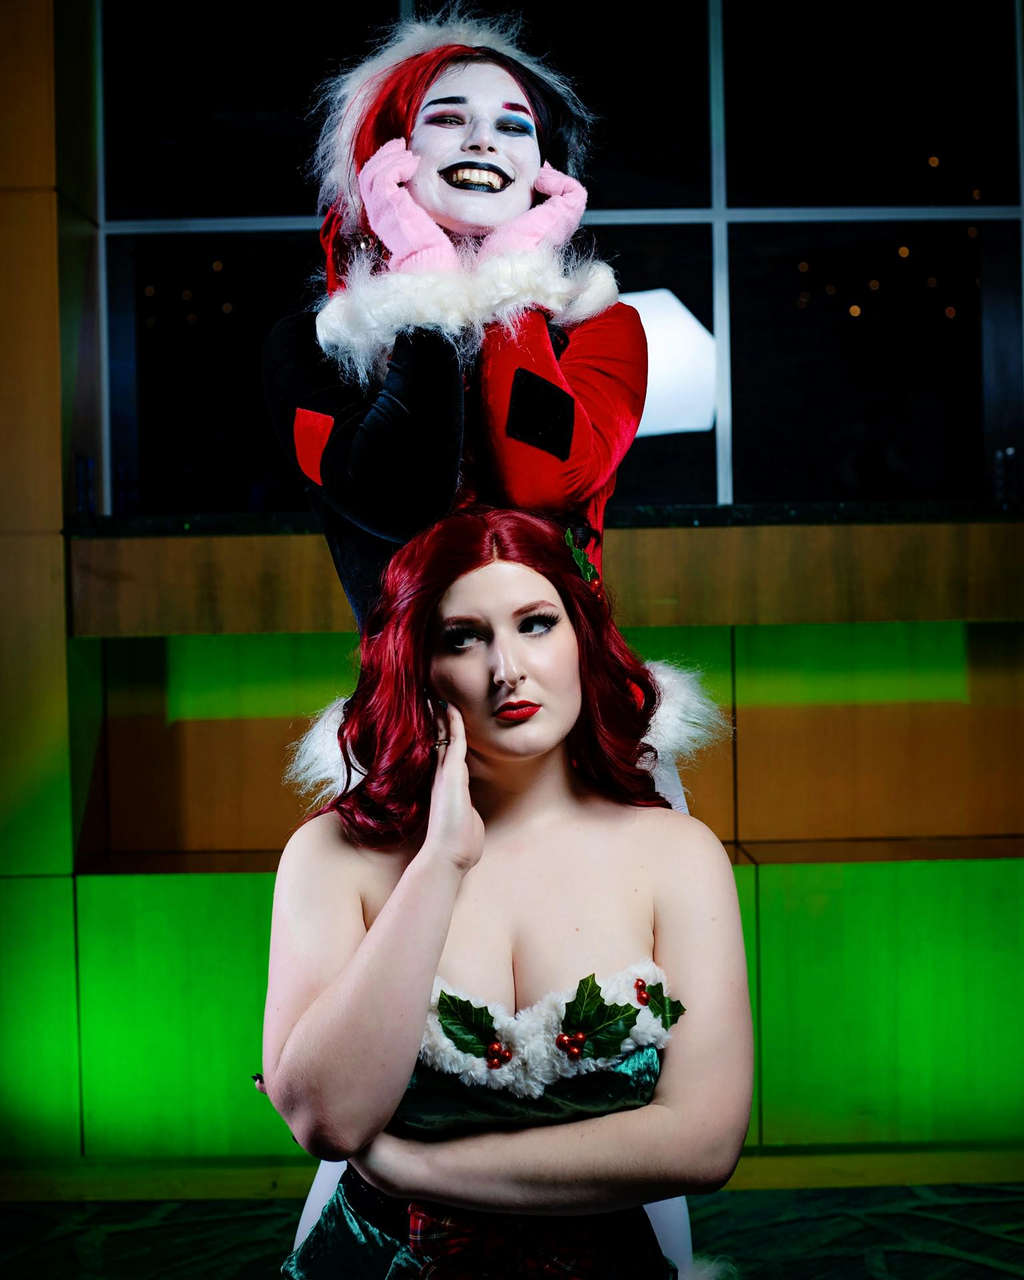 Poison Ivy And Harley Quin By Sara Husselman And Jackie Uszenski Sarahusselman And Craycraykitty1